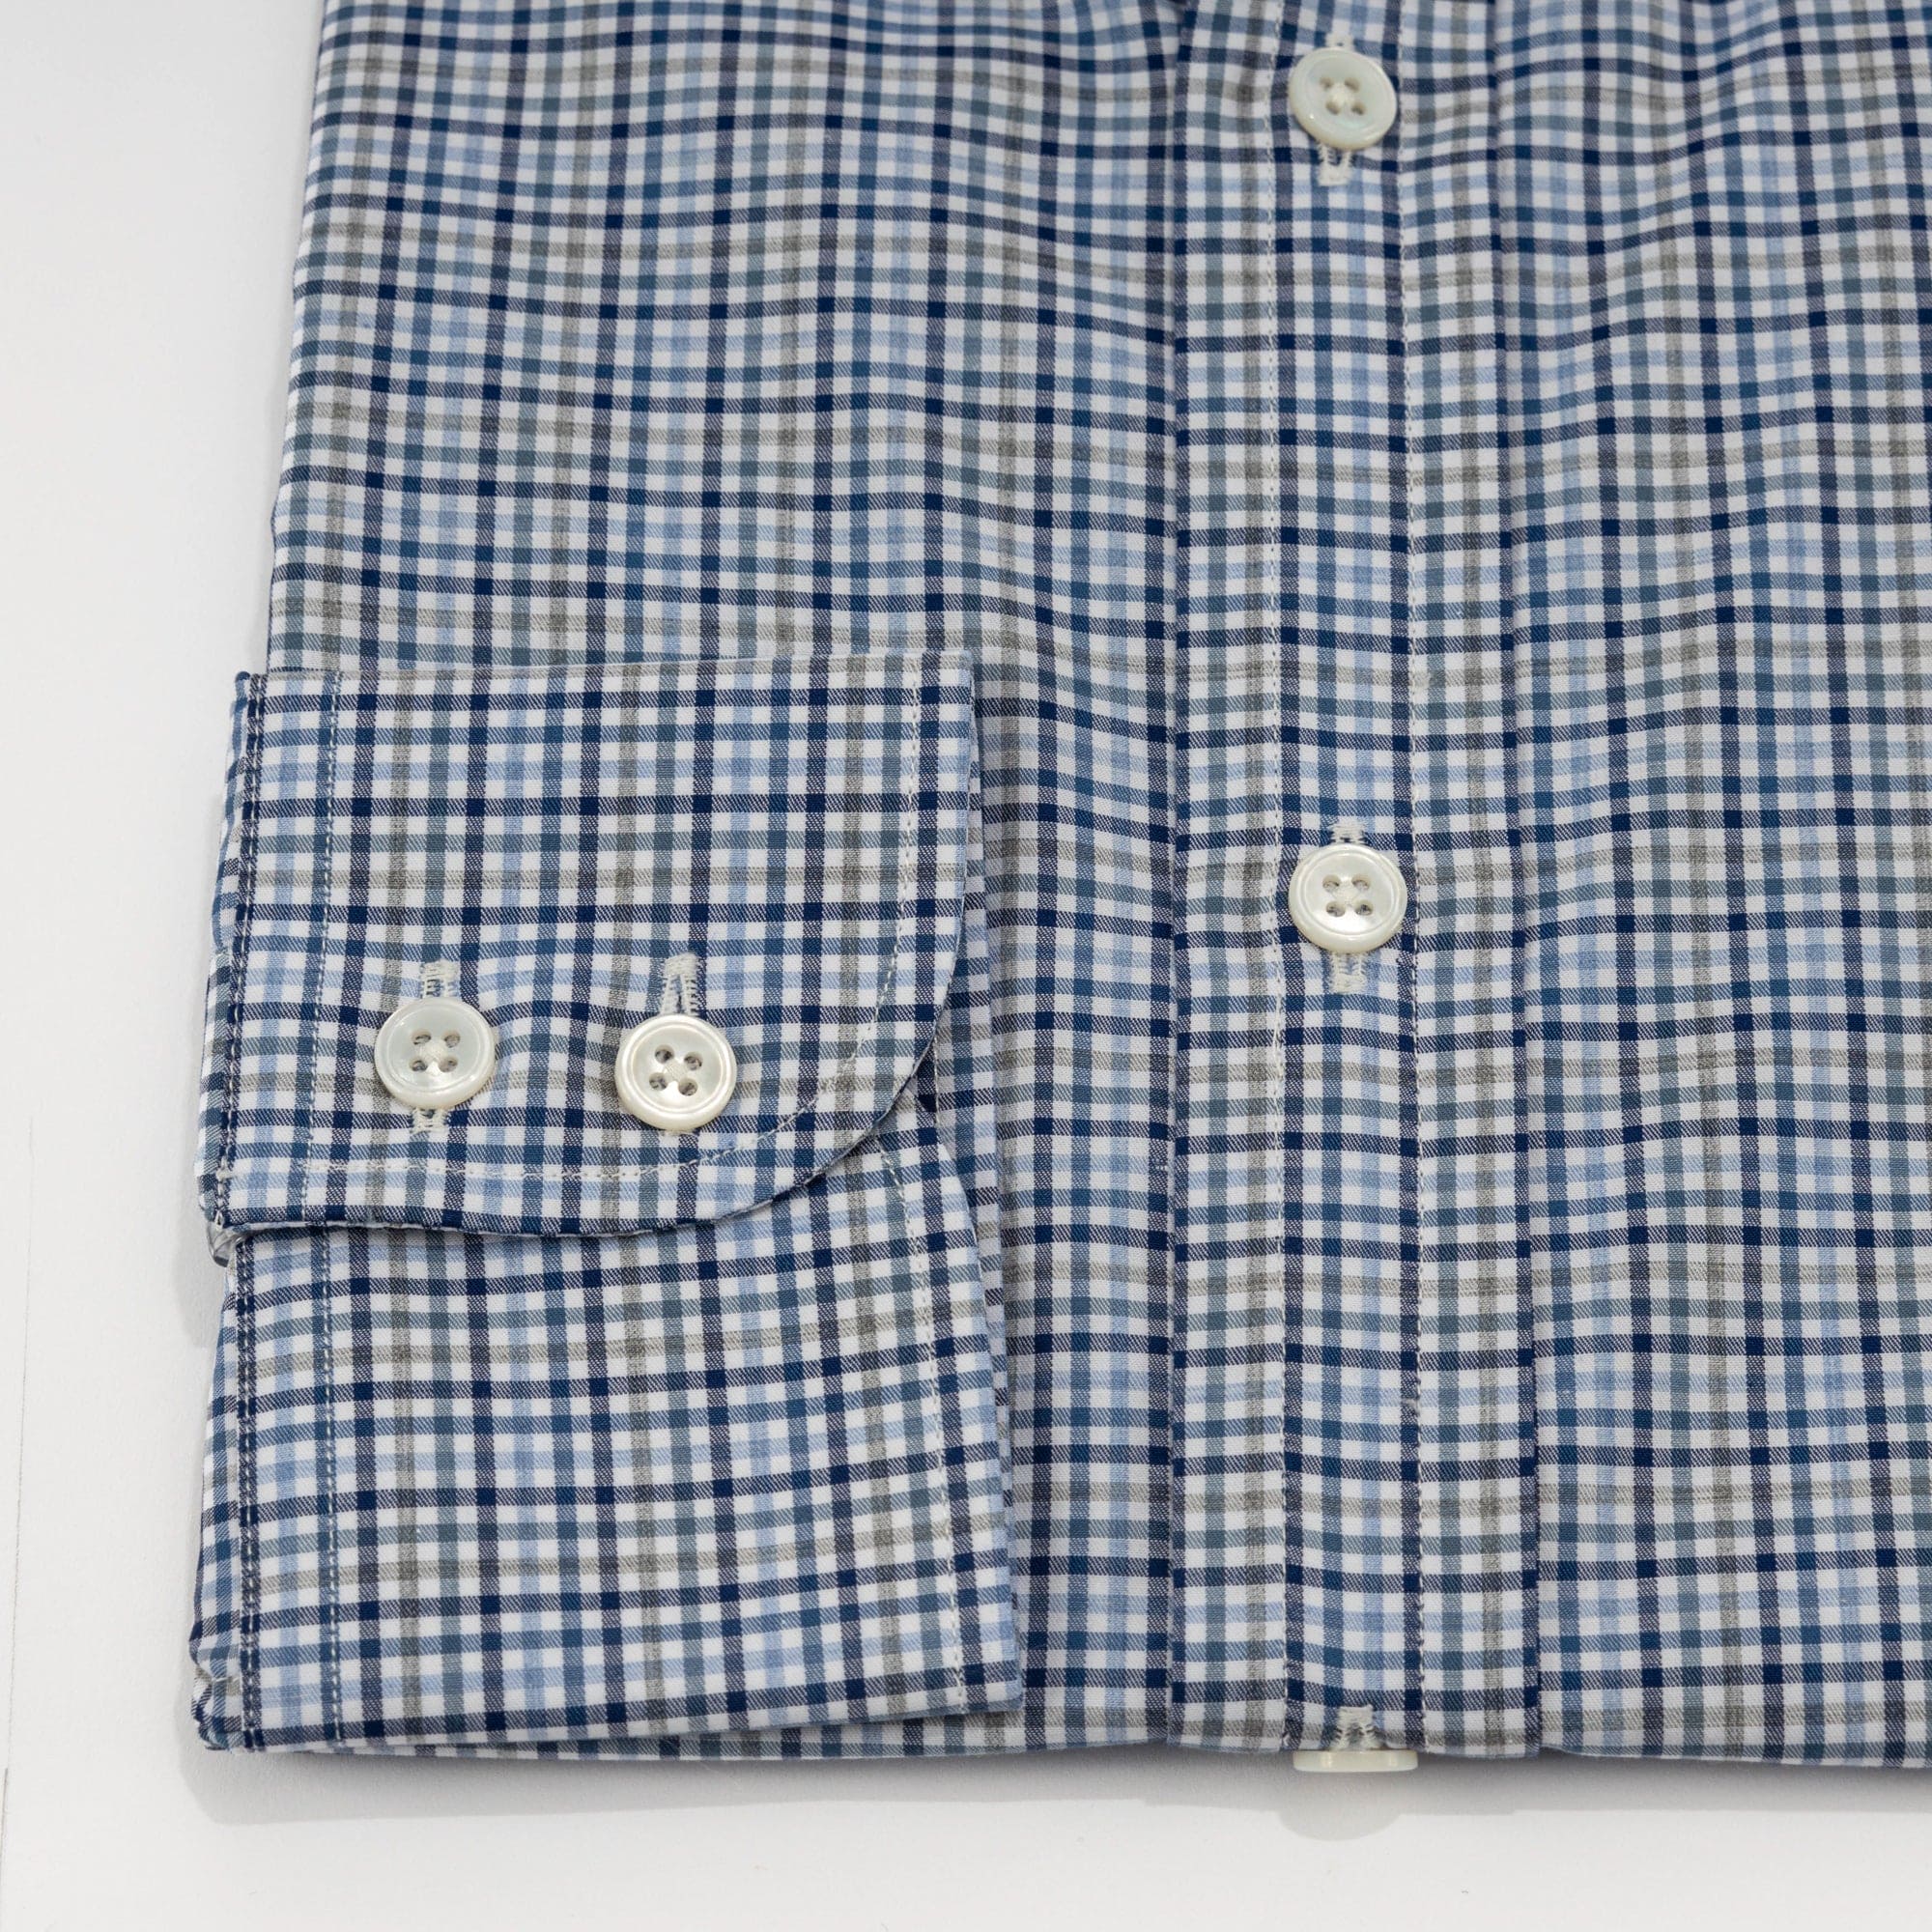 Contemporary Fit, Button Down Collar, 2 Button Cuff Shirt in White With Grey, Navy & Blue Overcheck